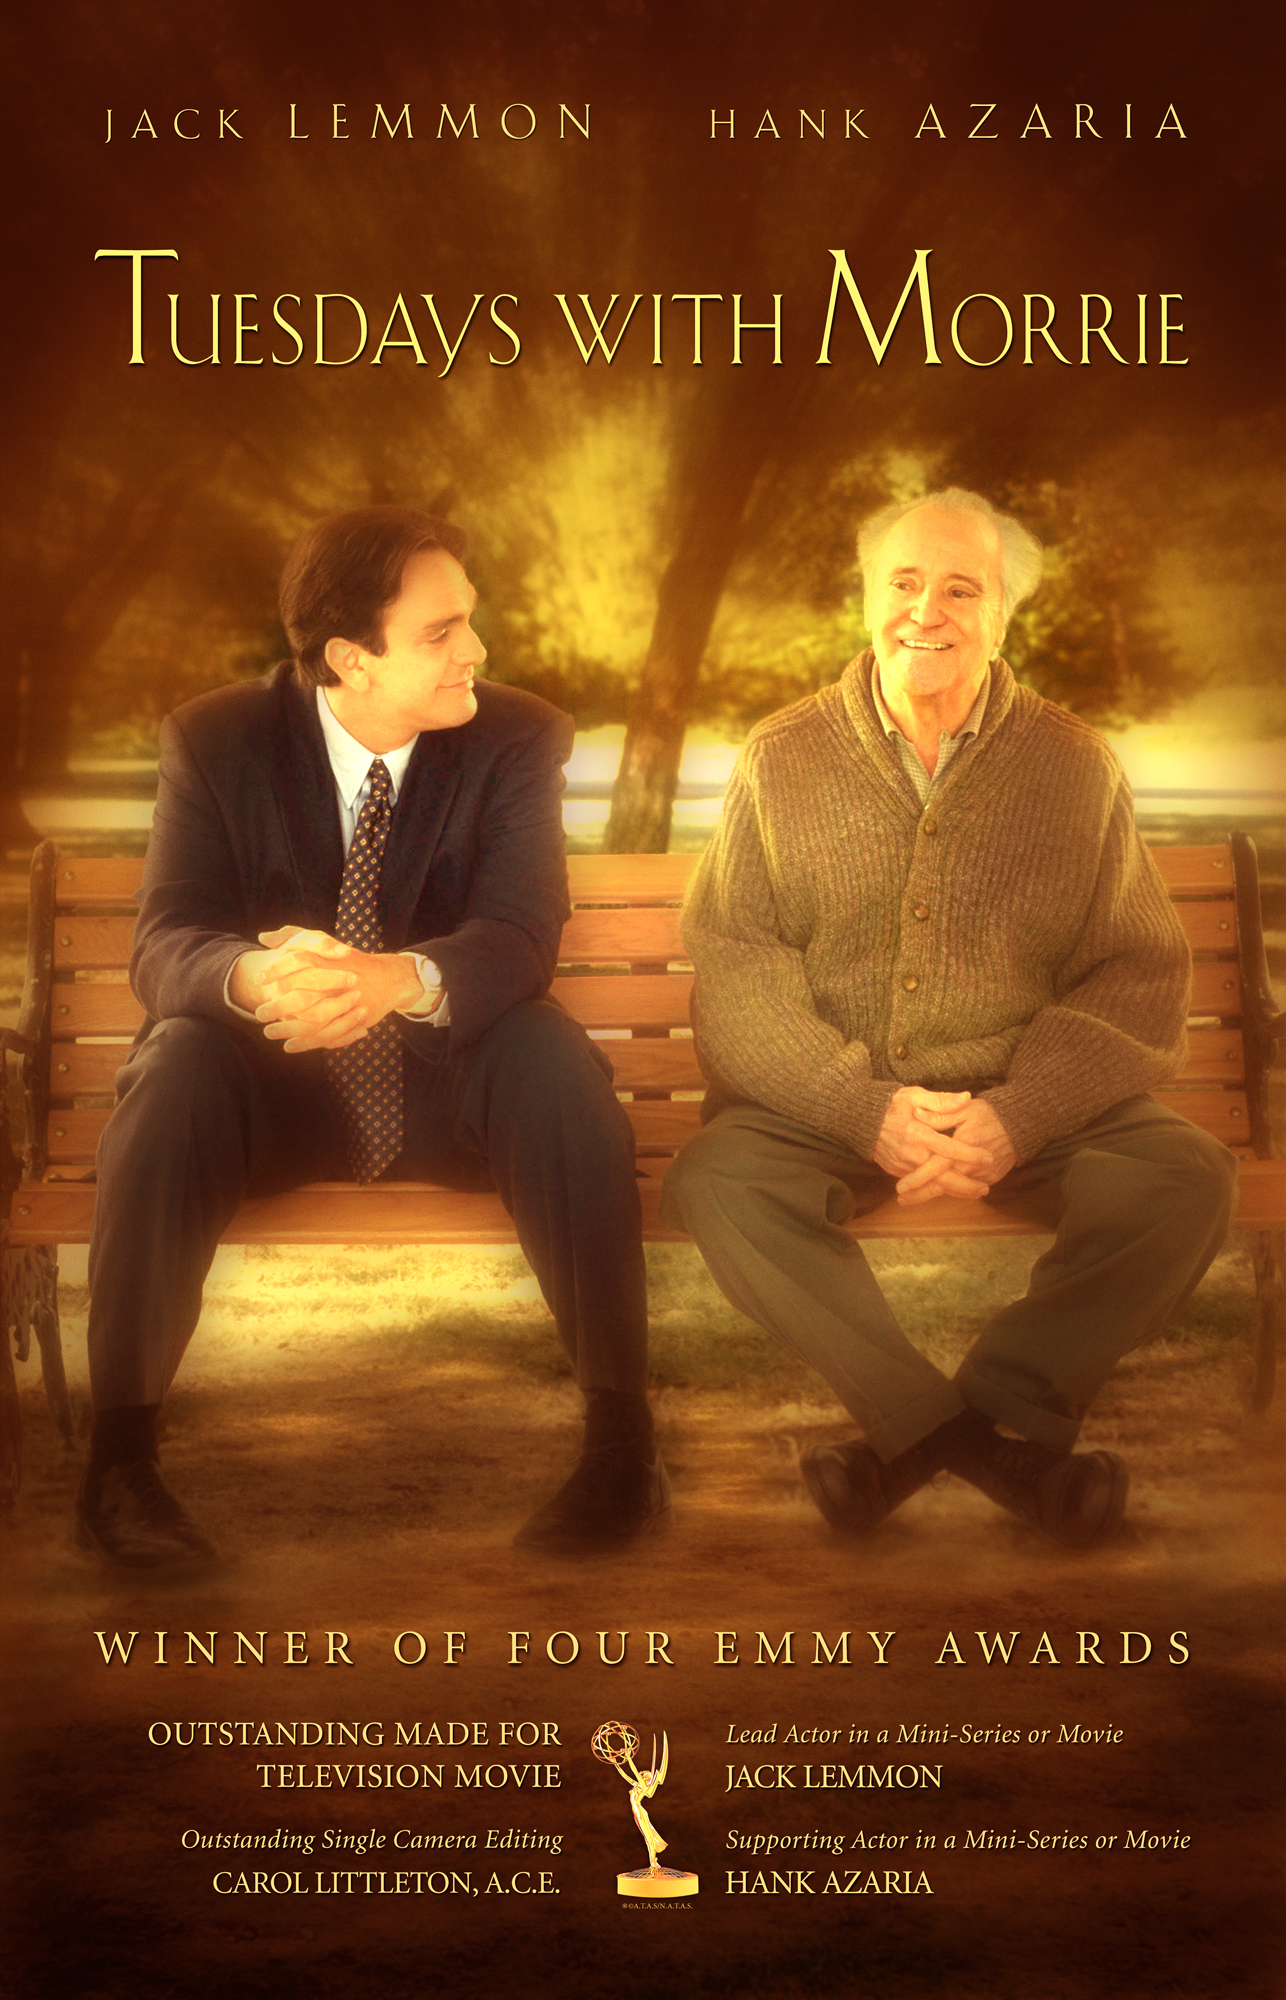 Background - Tuesdays with Morrie